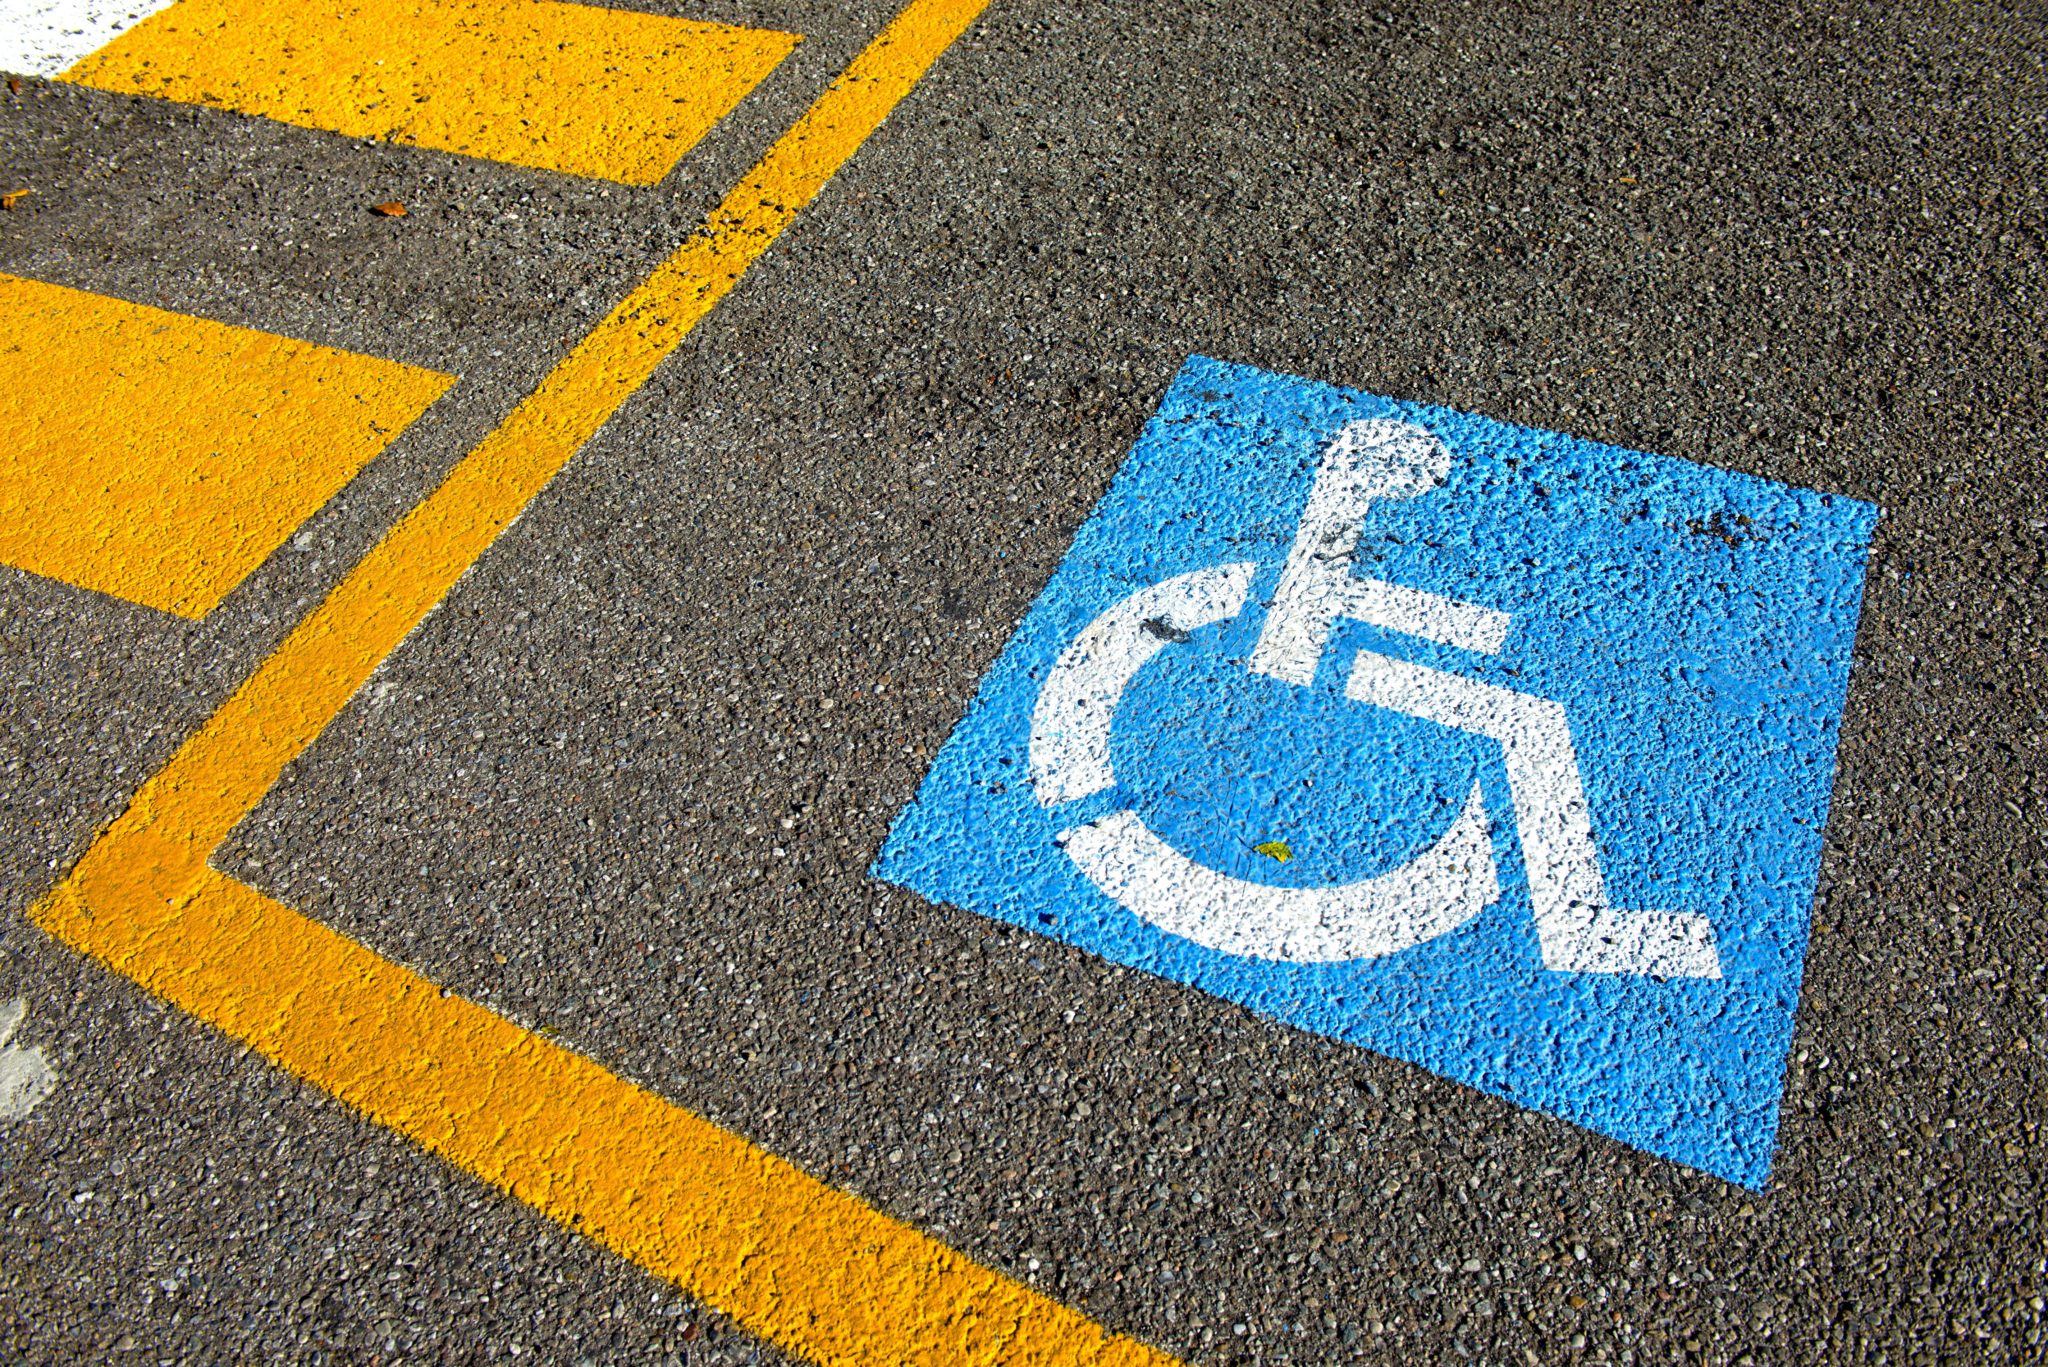 A disability parking spot is seen in Italy in November 2013.